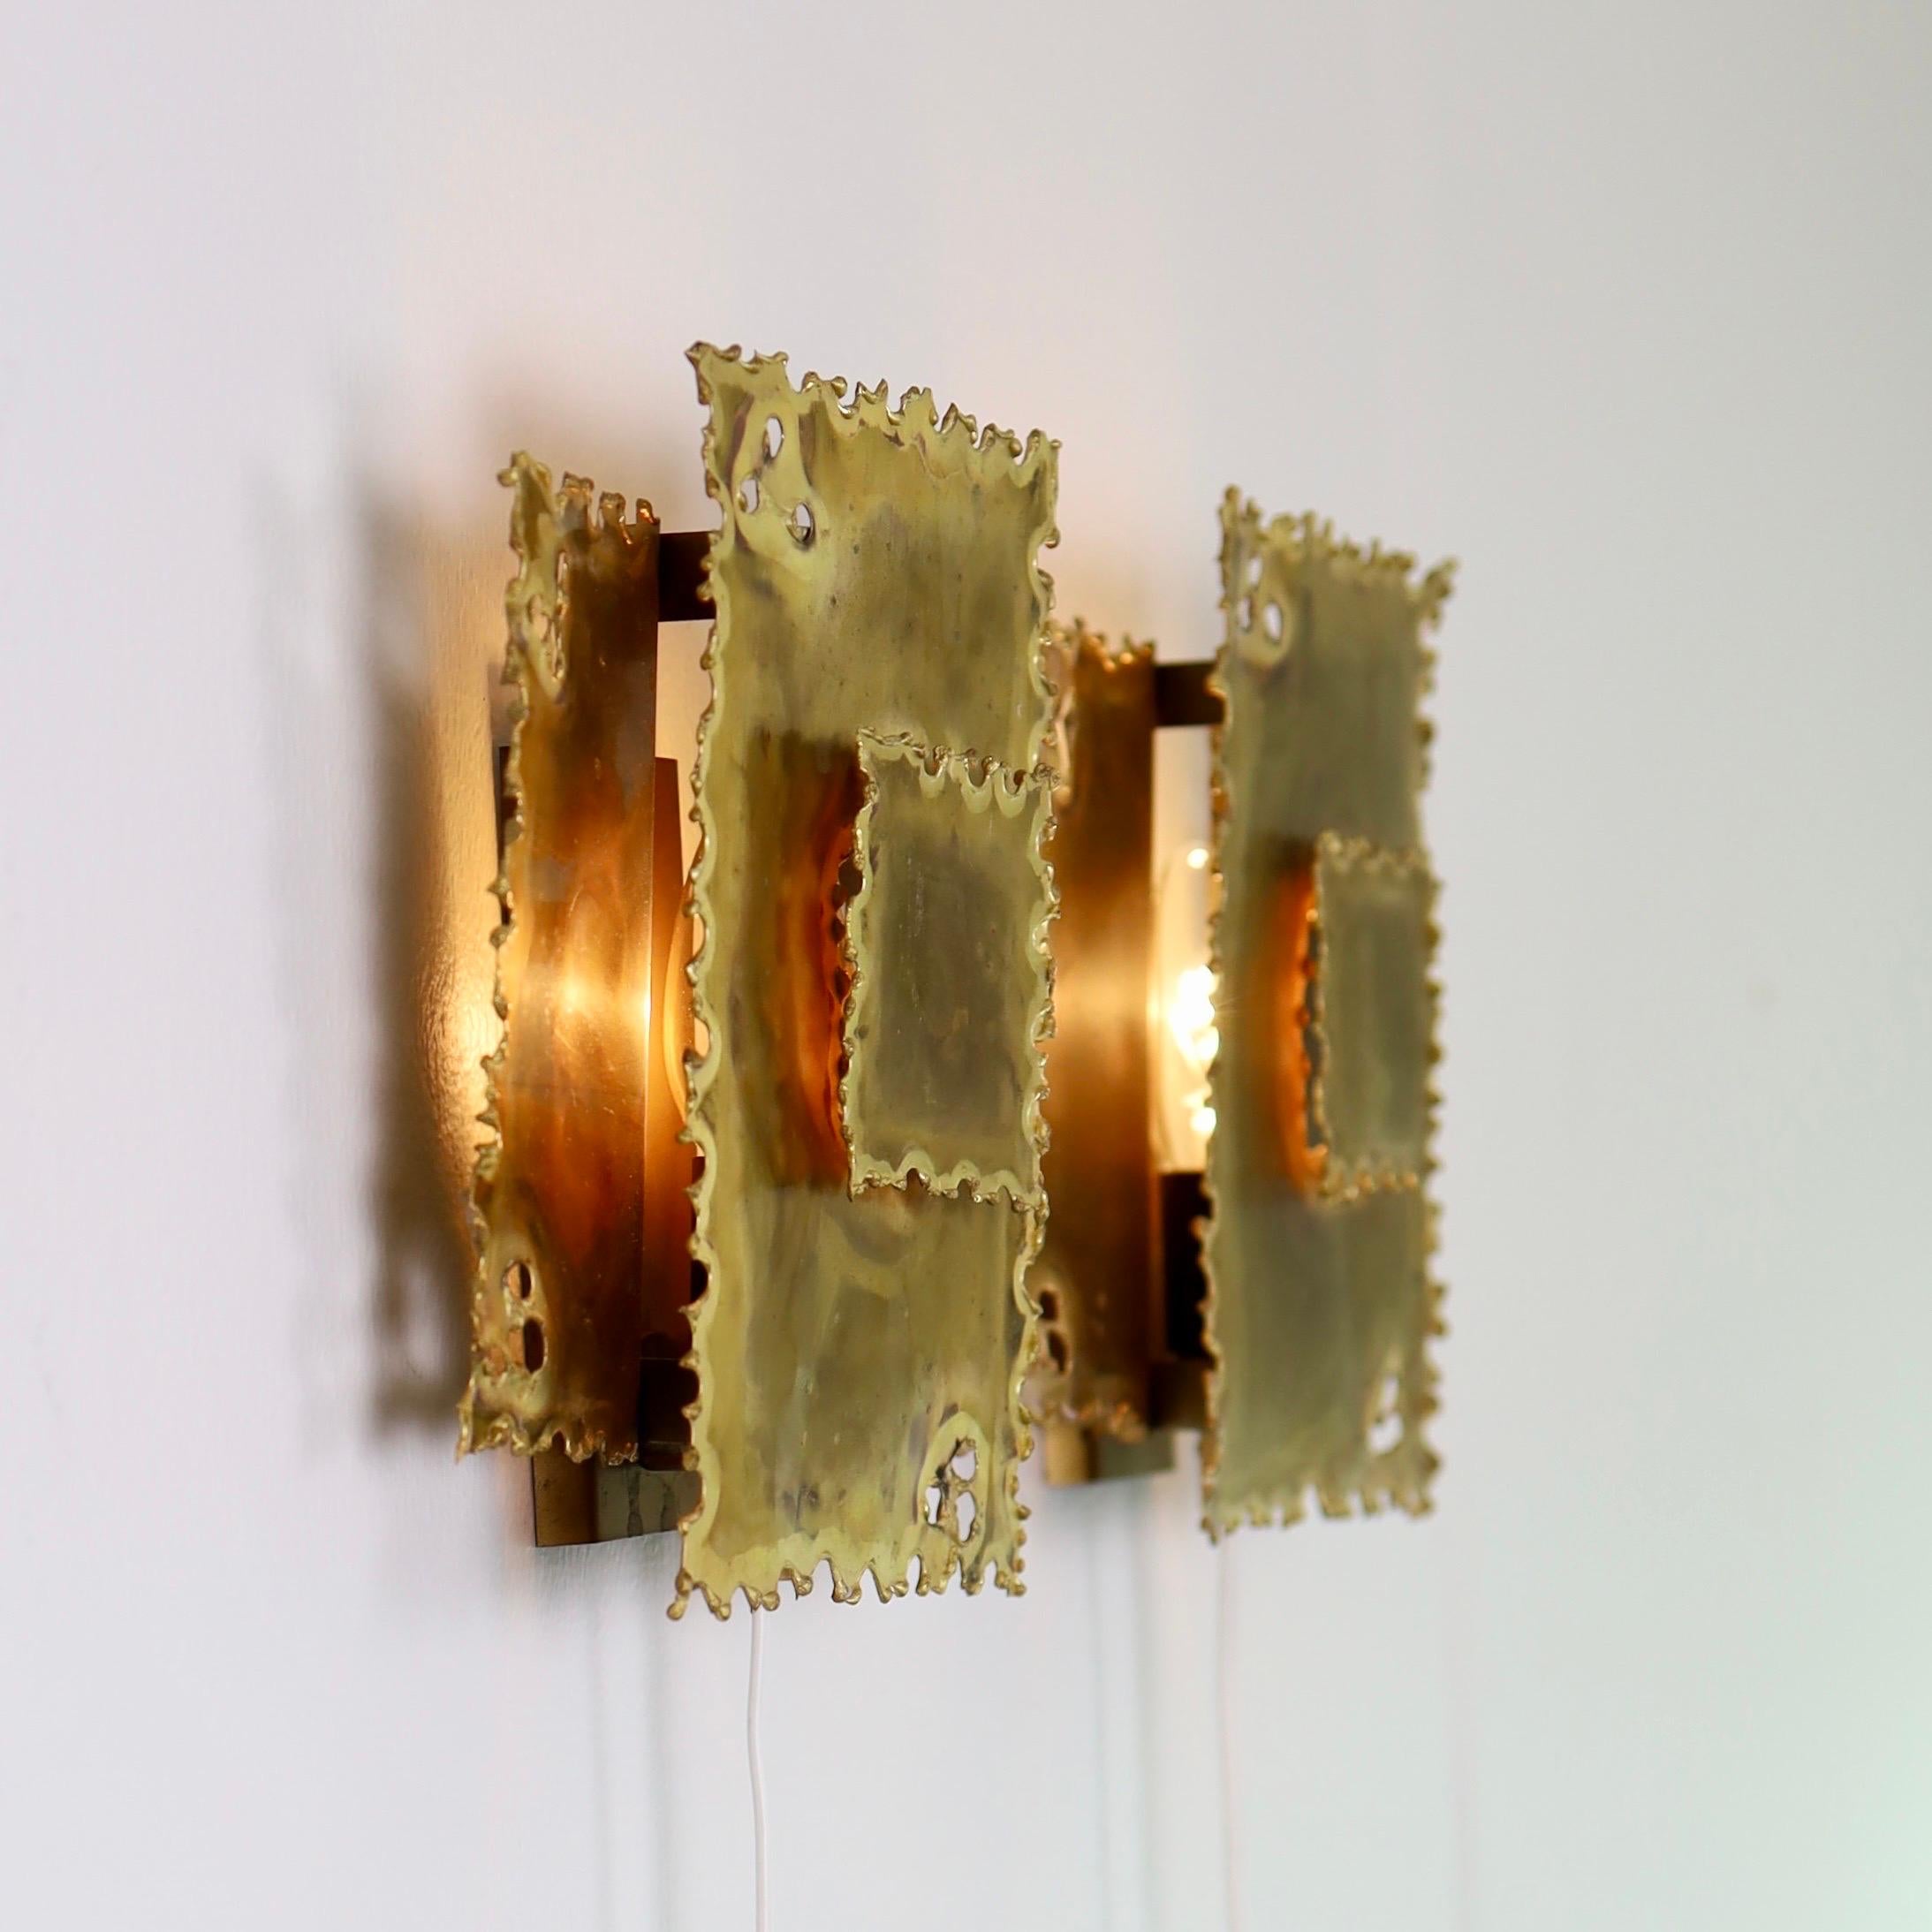 Brutalist Pair of Square Brass Wall Lamps by Svend Aage Holm Sorensen, 1960s, Denmark For Sale